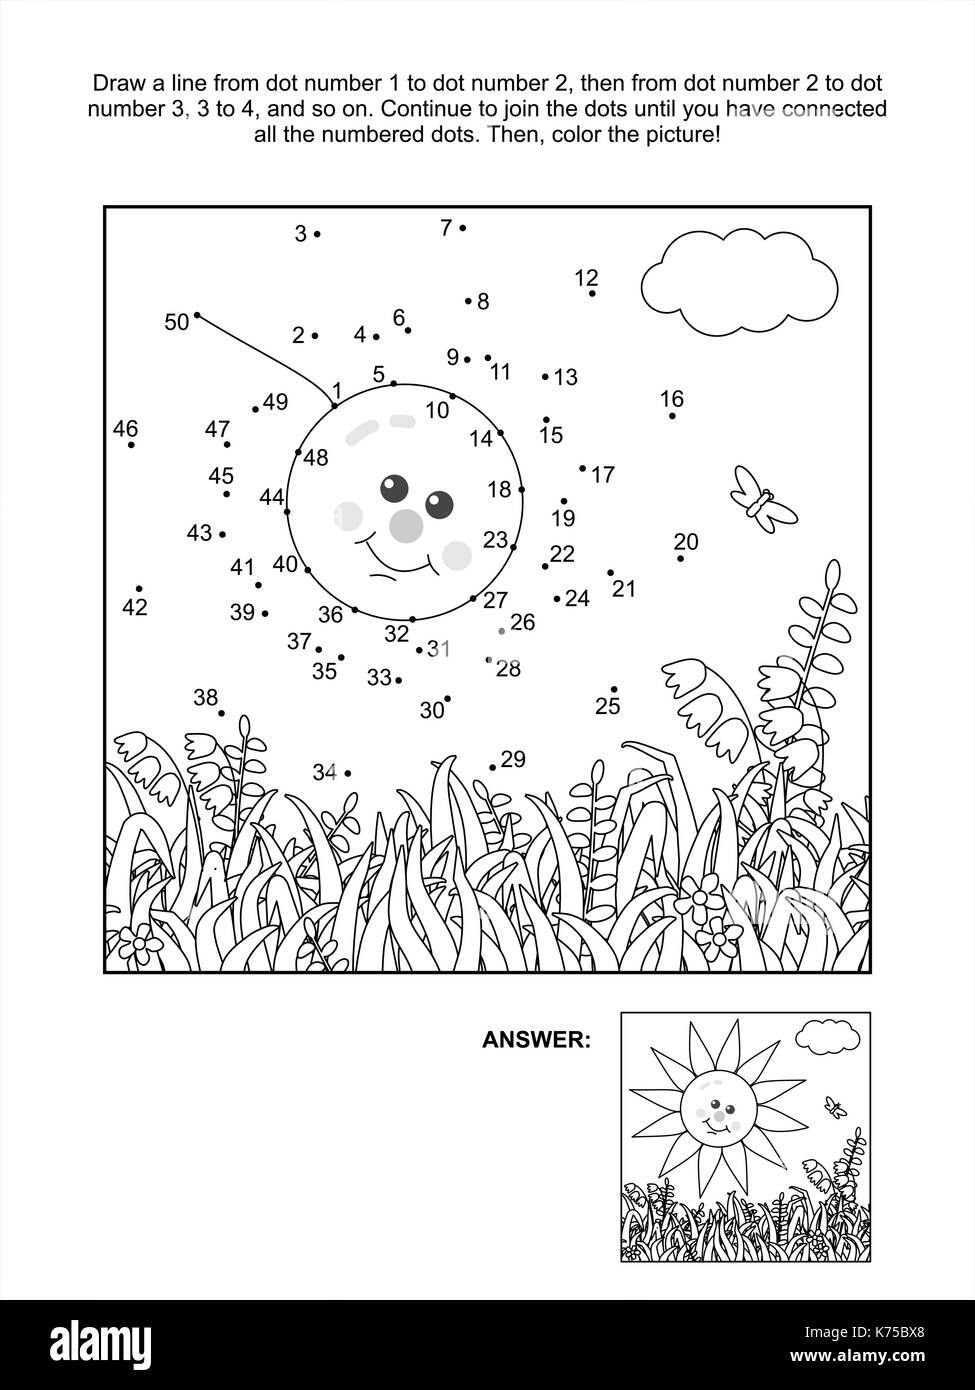 Connect the dots picture puzzle and coloring page with sun, grass and flowers. Answer included. Stock Vector